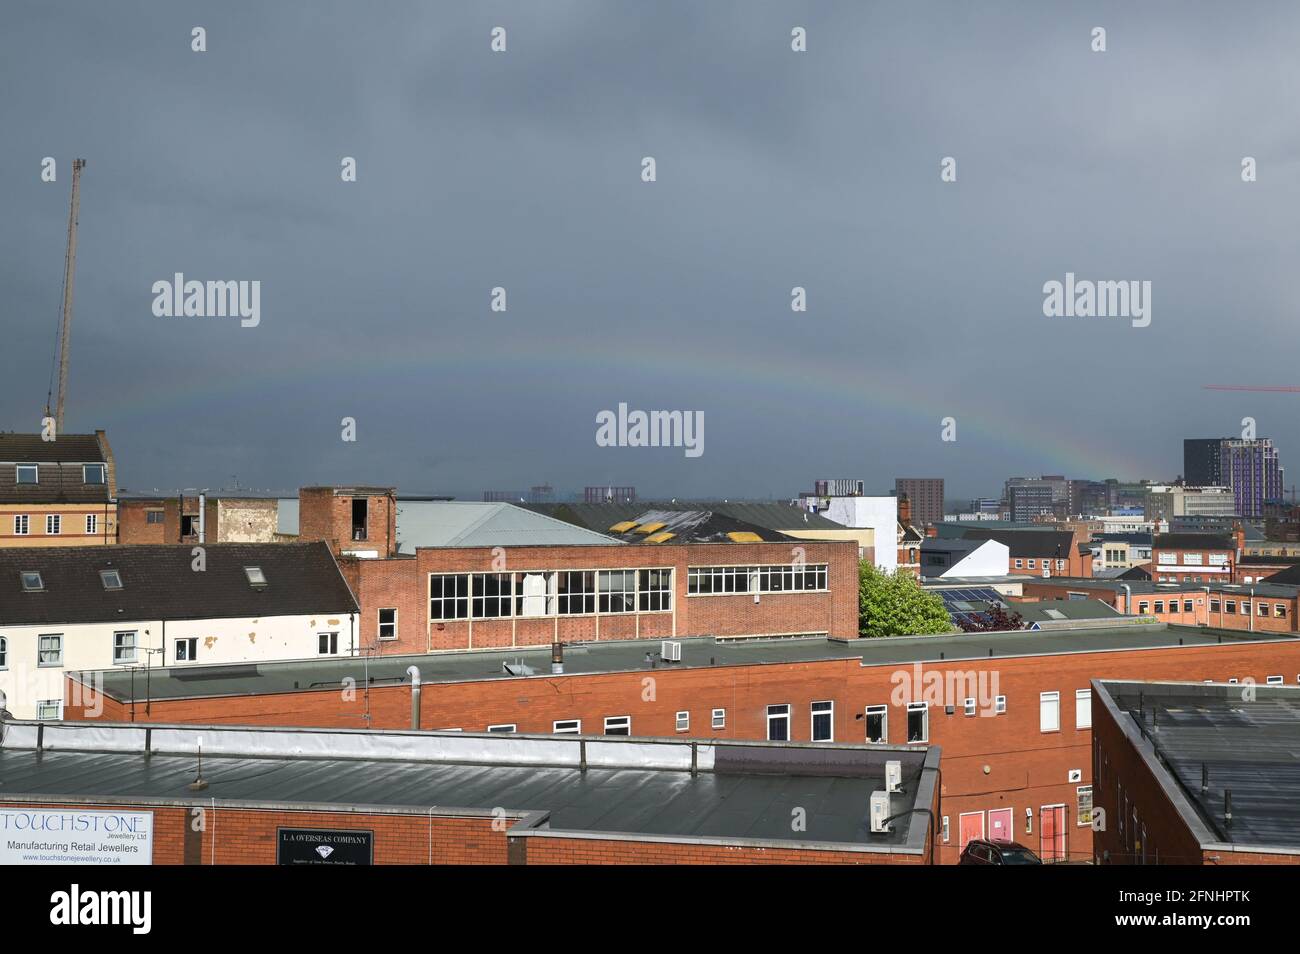 Aston, Birmingham, West Midlands, UK. 17th May 2021. A rare low rainbow formed over the Aston area of Birmingham city centre, England this afternoon as heavy rain hit many parts of the country. The bow was unusually low and started from the faculty building at the right of the image. Pic by Sam Holiday/Alamy Live News Stock Photo